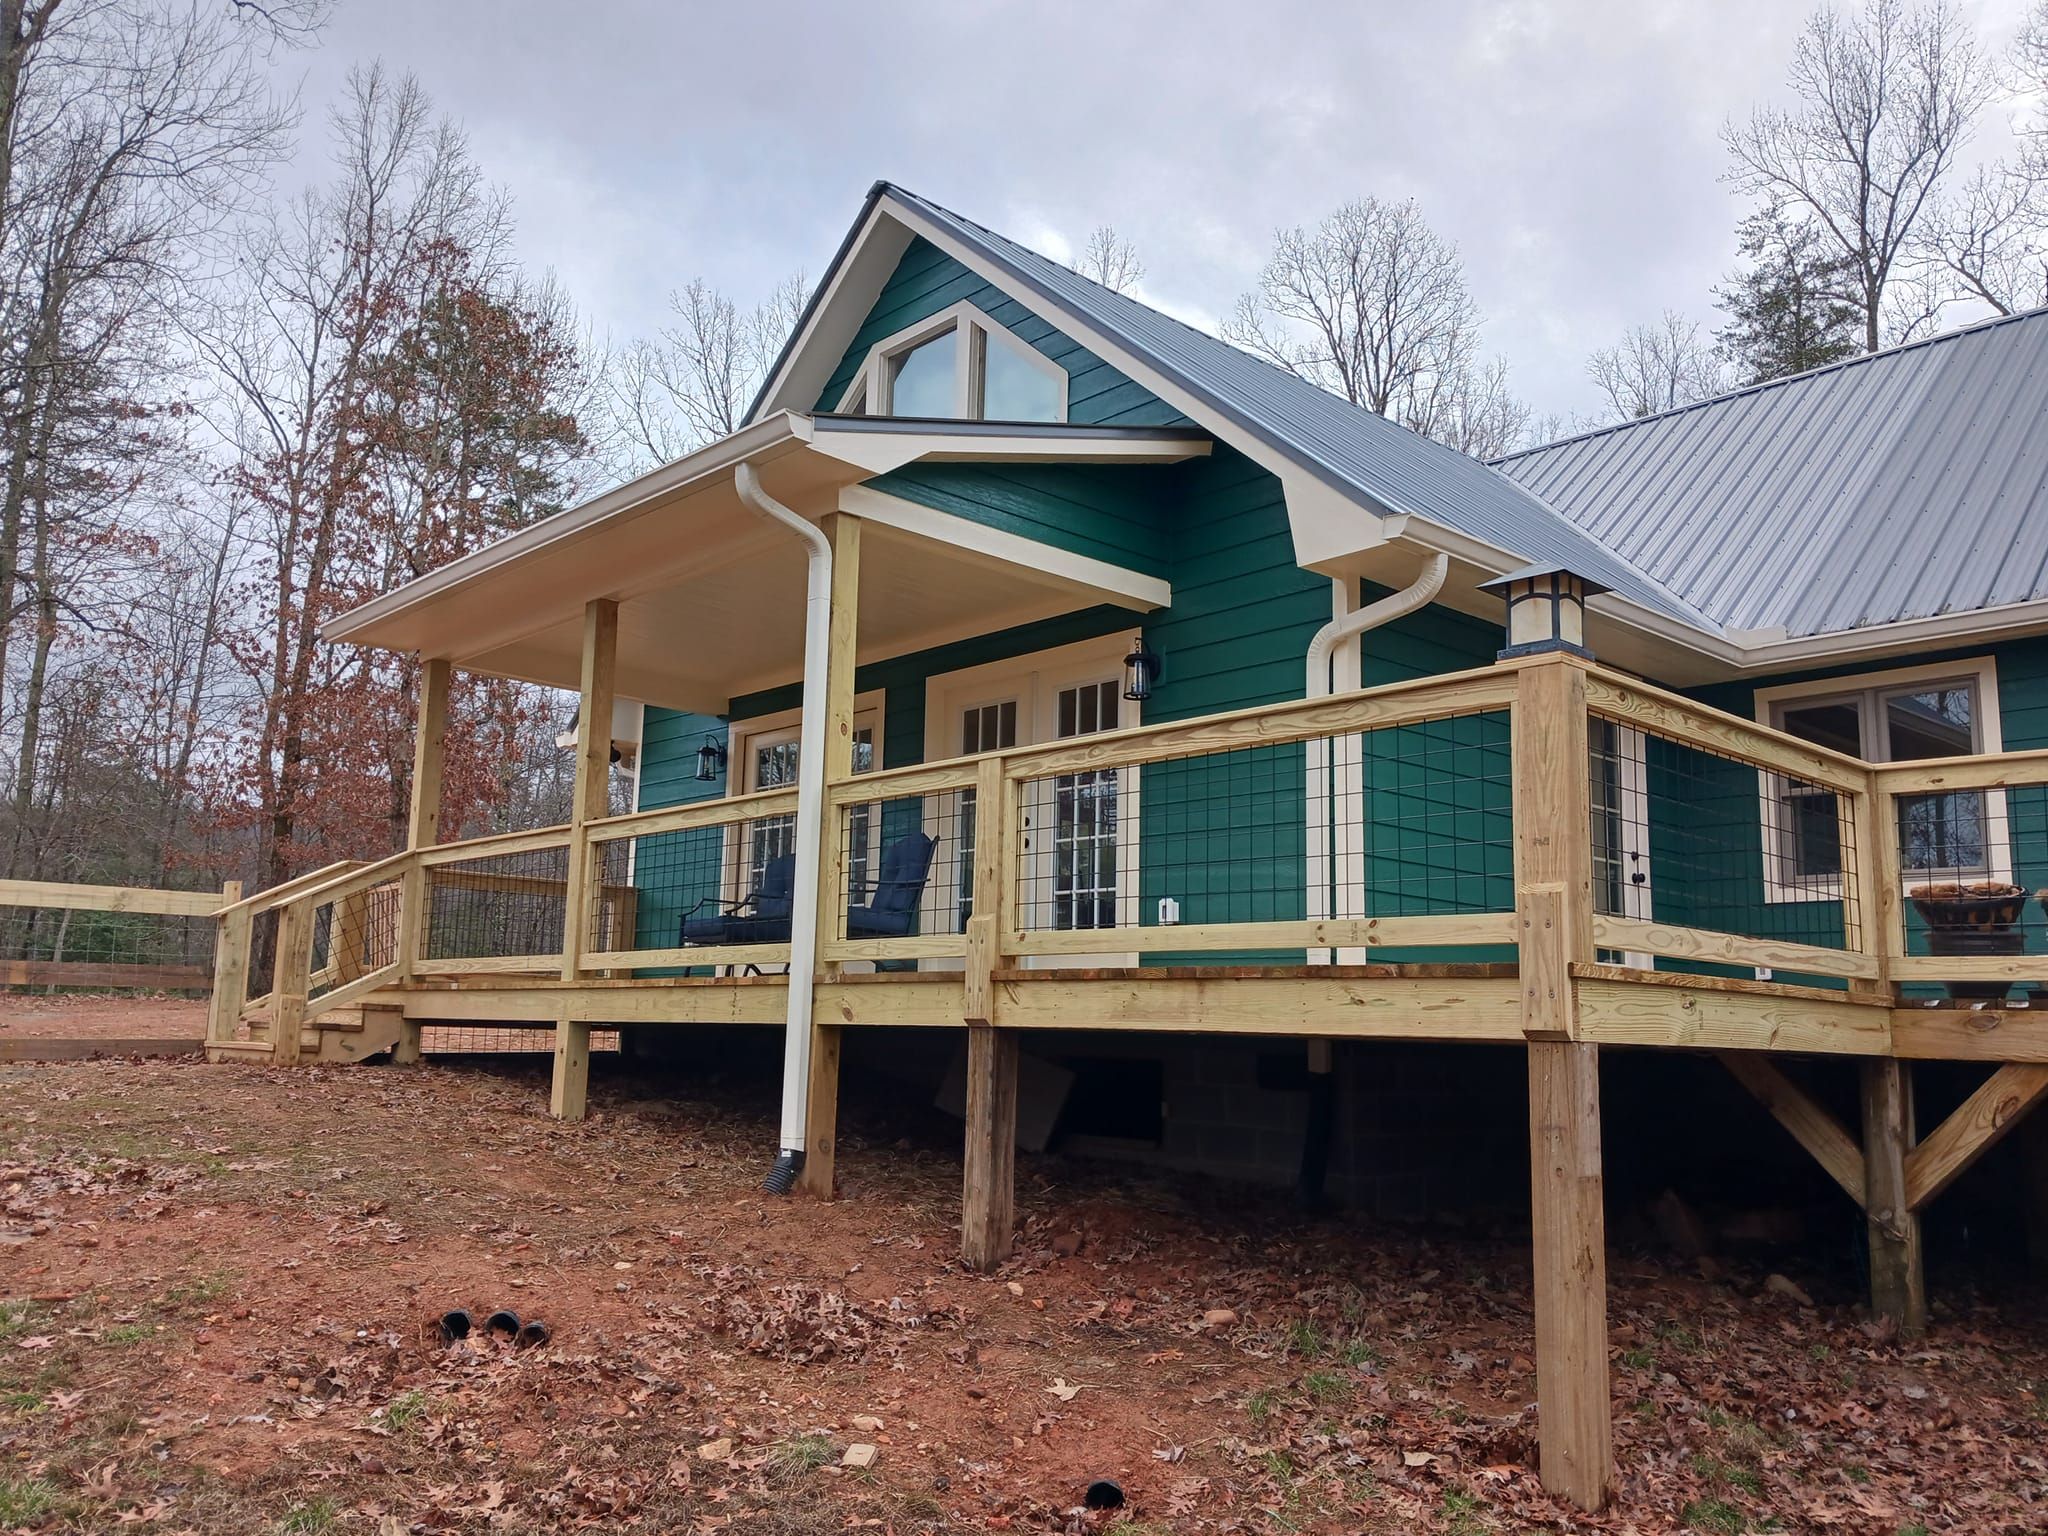 New Home Construction for Kevin Terry Construction LLC in Blairsville, Georgia